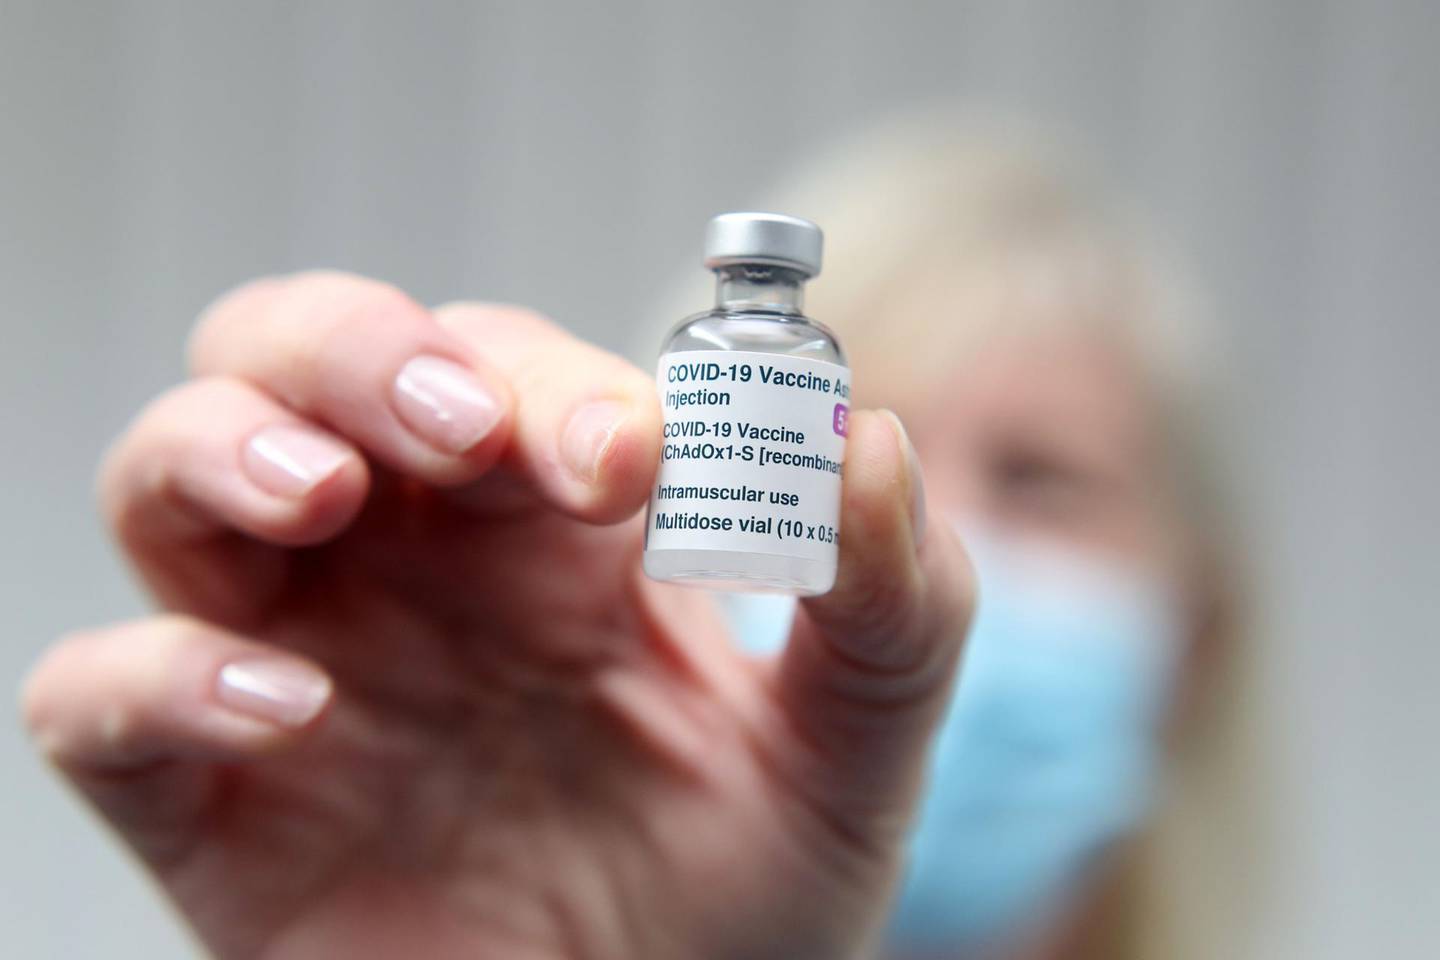 A vial of the AstraZeneca/Oxford Covid-19 vaccine is held at the Pontcae Medical Practice in Merthyr Tydfil in south Wales on January 4, 2021. Britain on Monday began rolling out the Oxford-AstraZeneca coronavirus vaccine, a possible game-changer in fighting the disease worldwide. / AFP / Geoff Caddick
